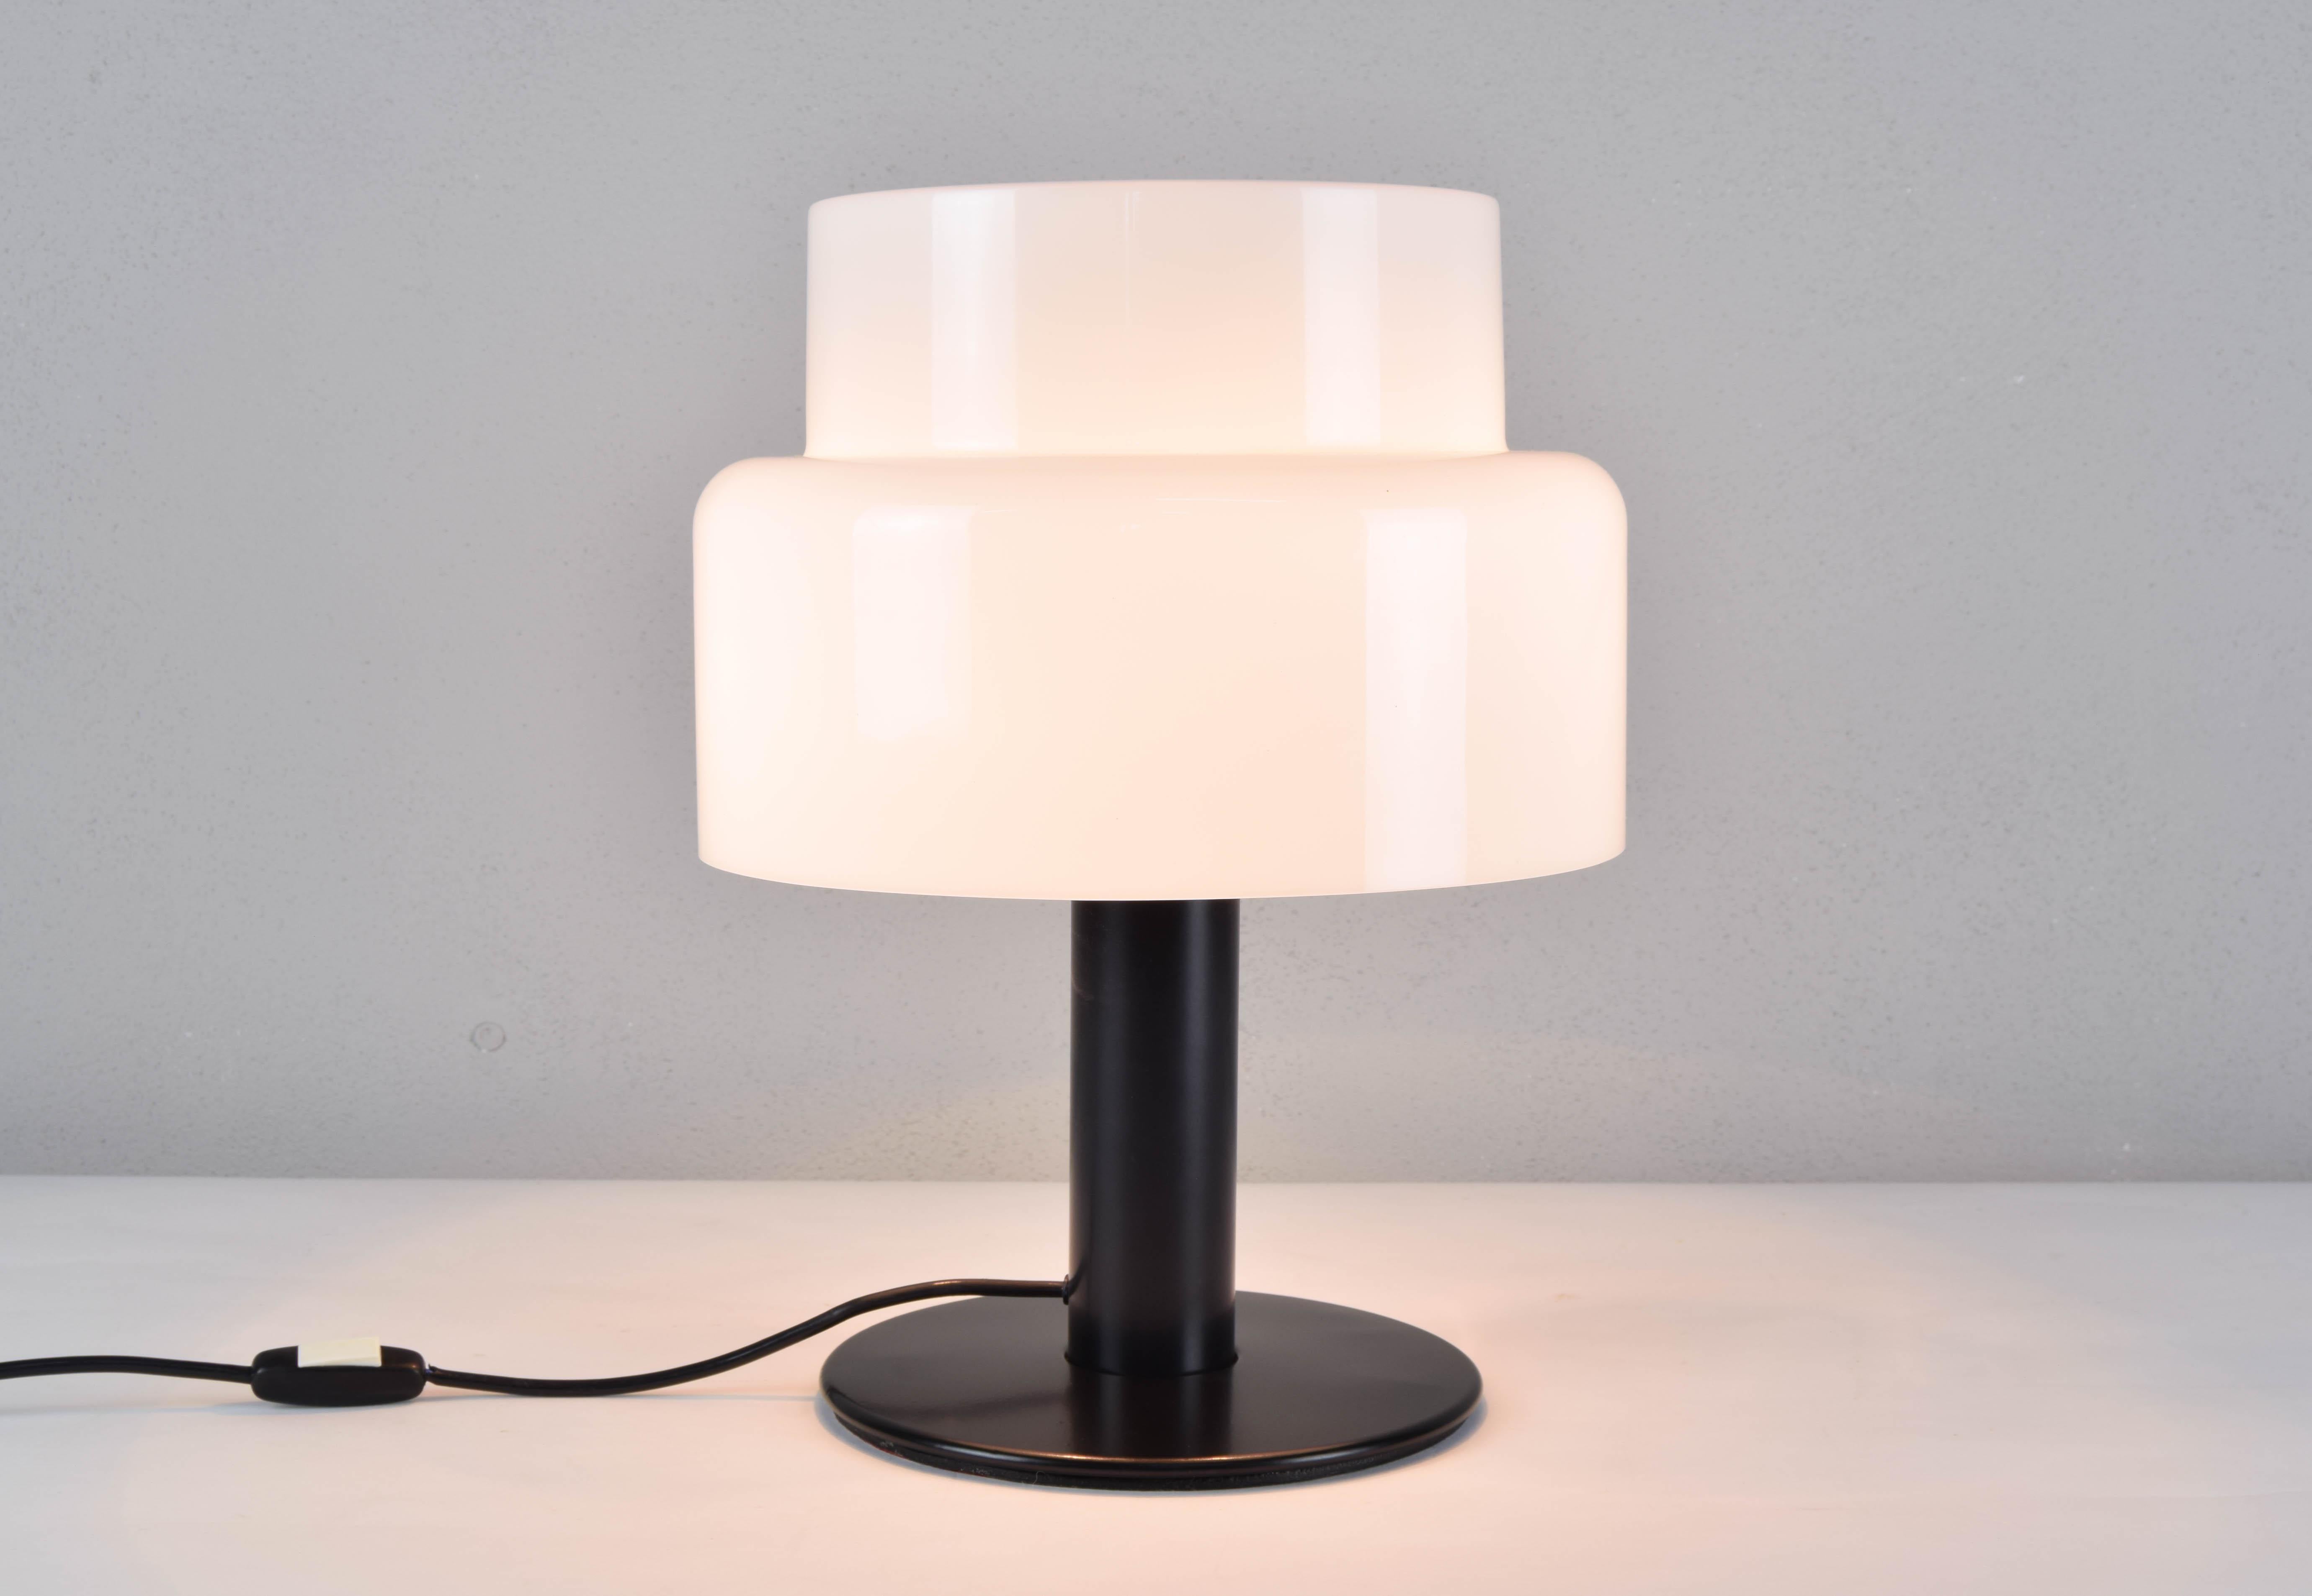 Lacquered Codialpo Mid-Century Modern Black and White Lucite Seta Table Lamp, Spain, 1970 For Sale